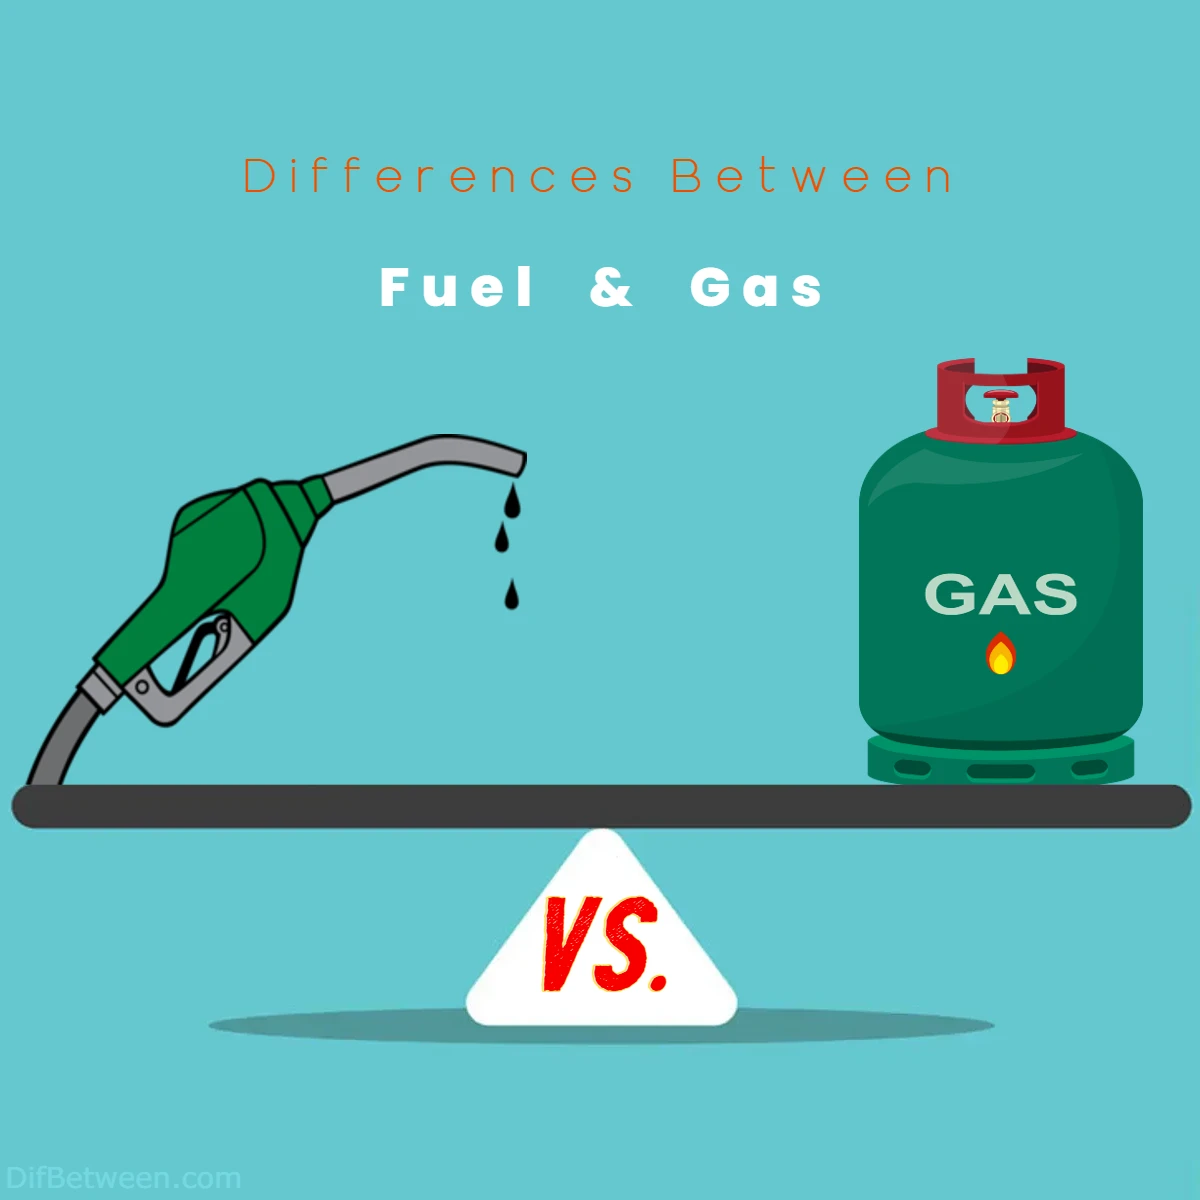 Differences Between Fuel vs Gas